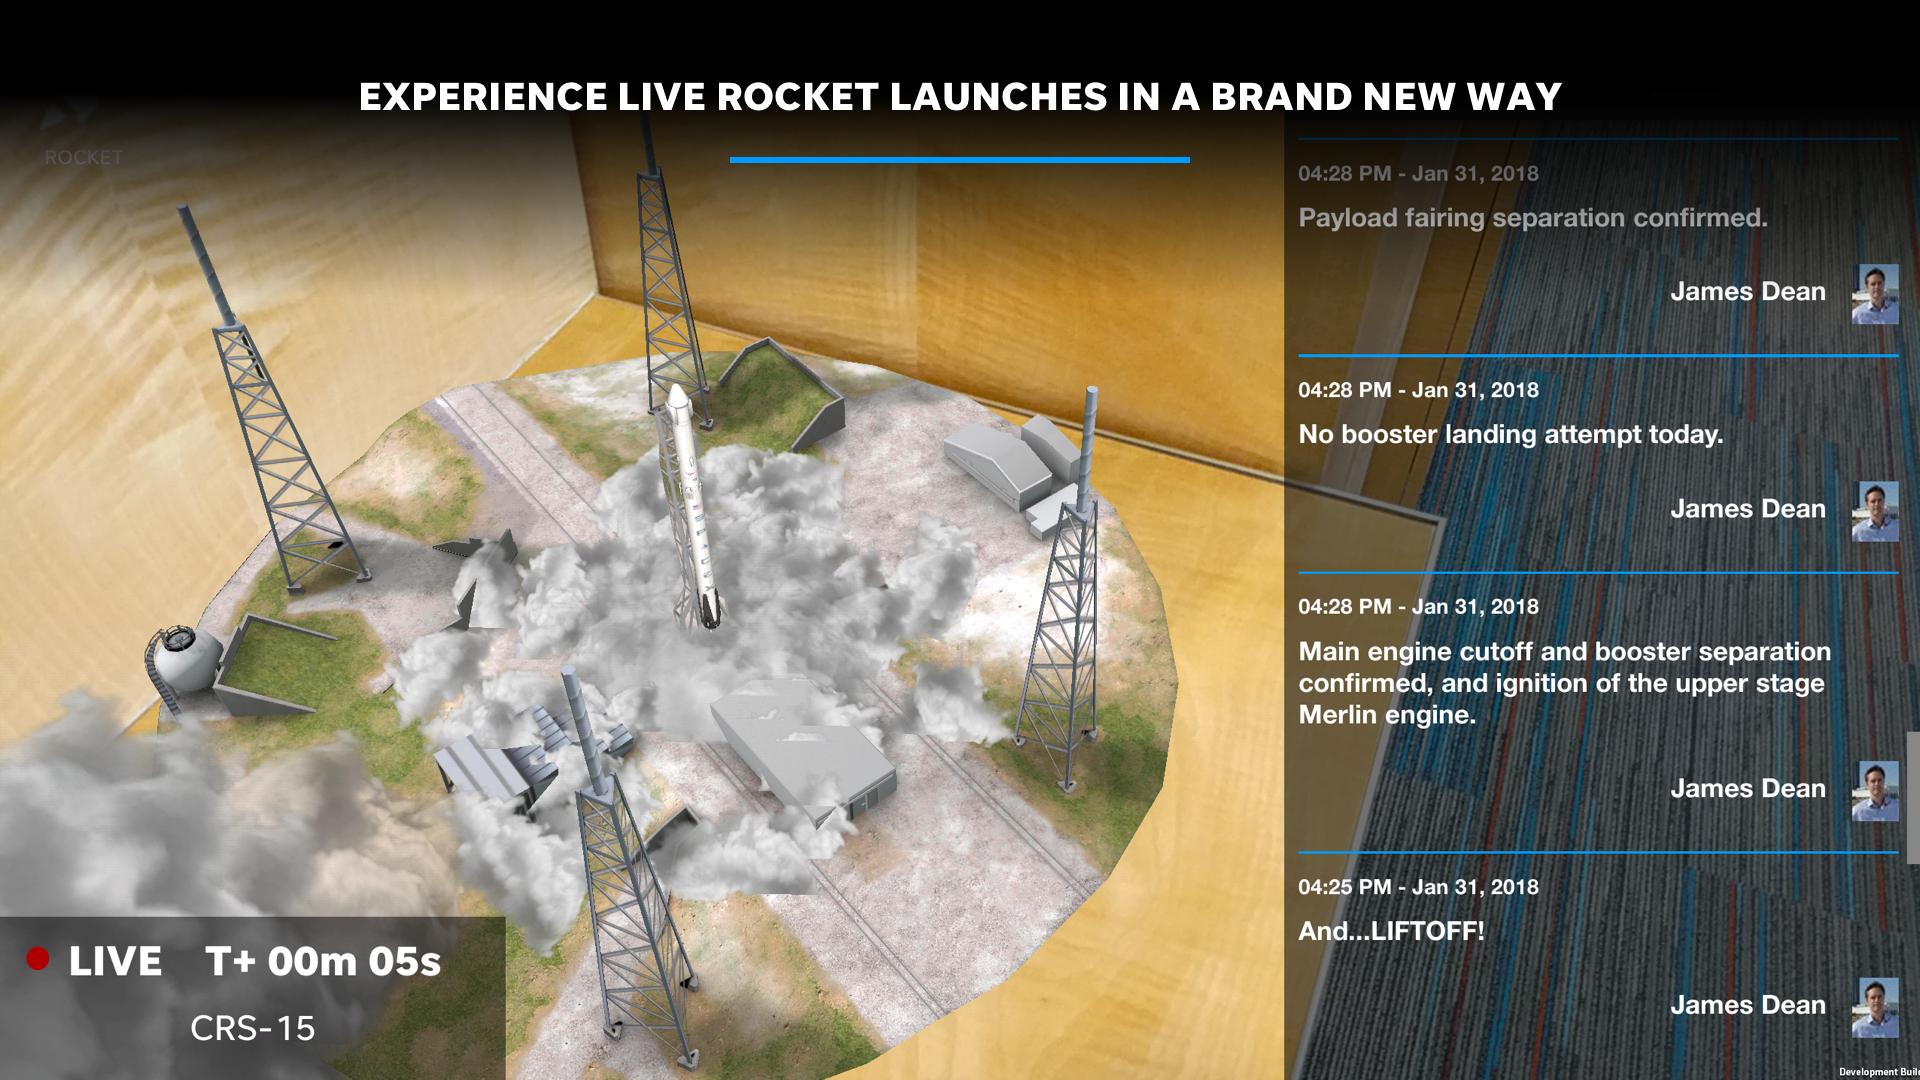 Live launch today. Launching experience.